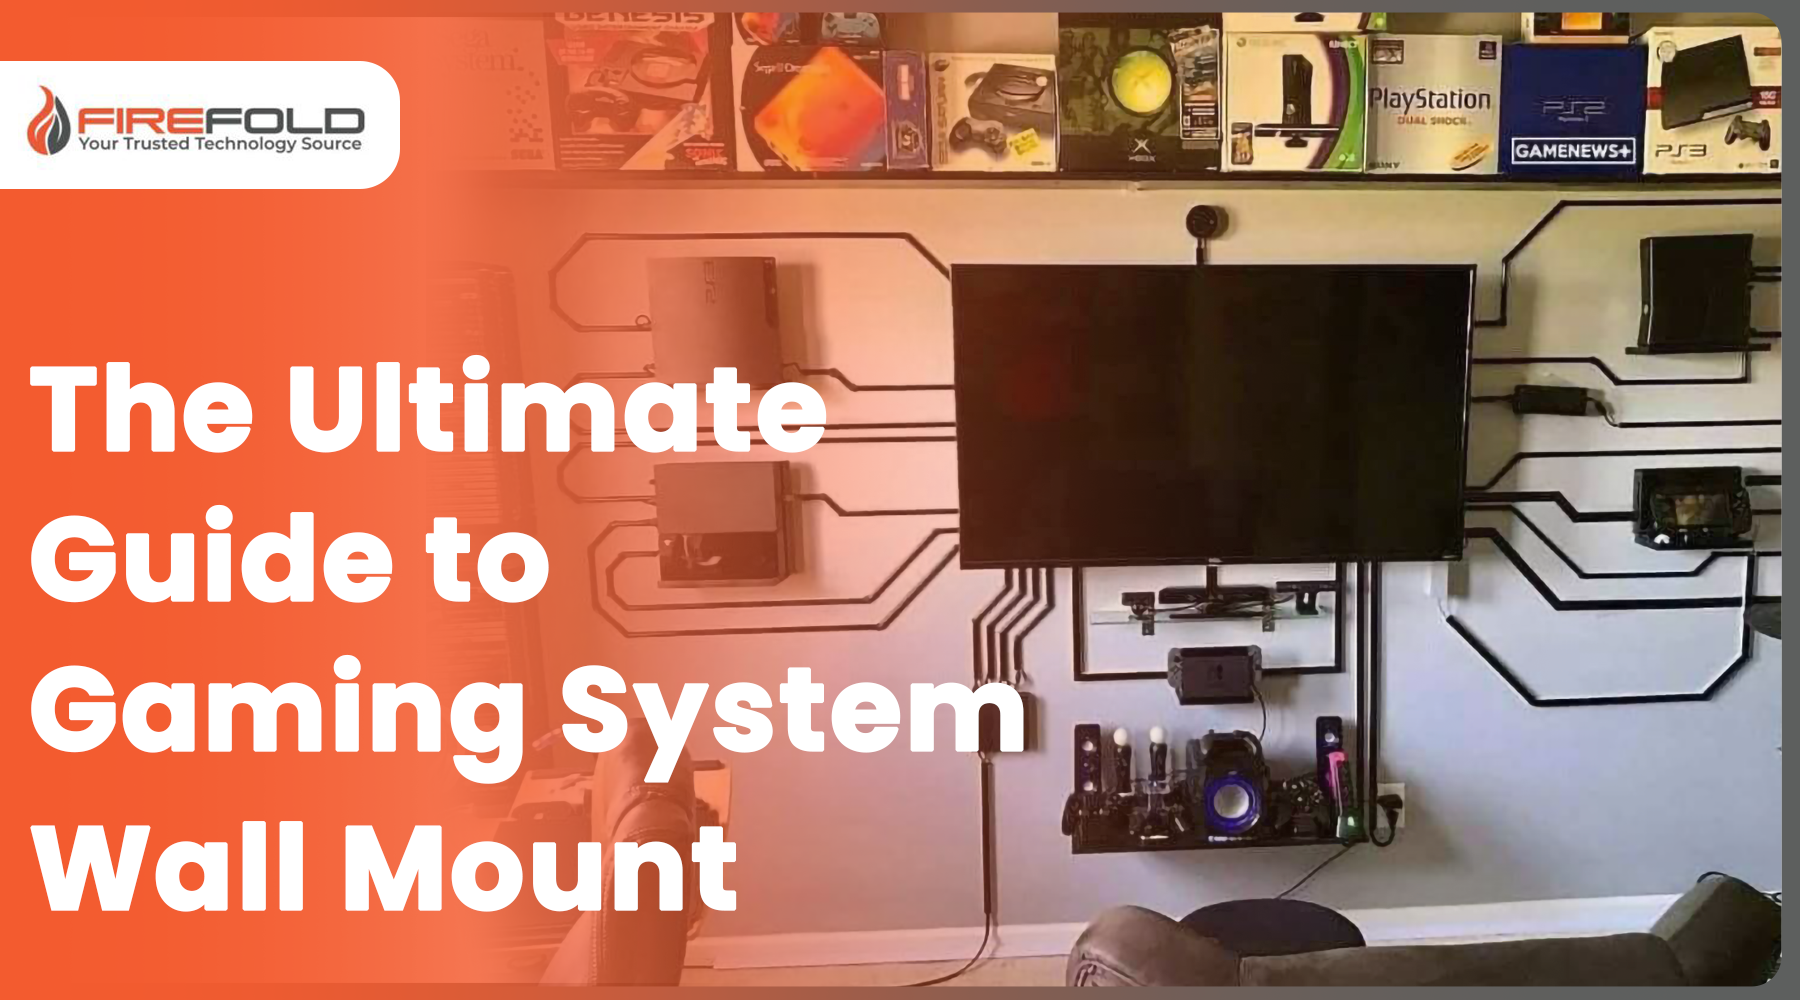 The Ultimate Guide to Gaming System Wall Mount